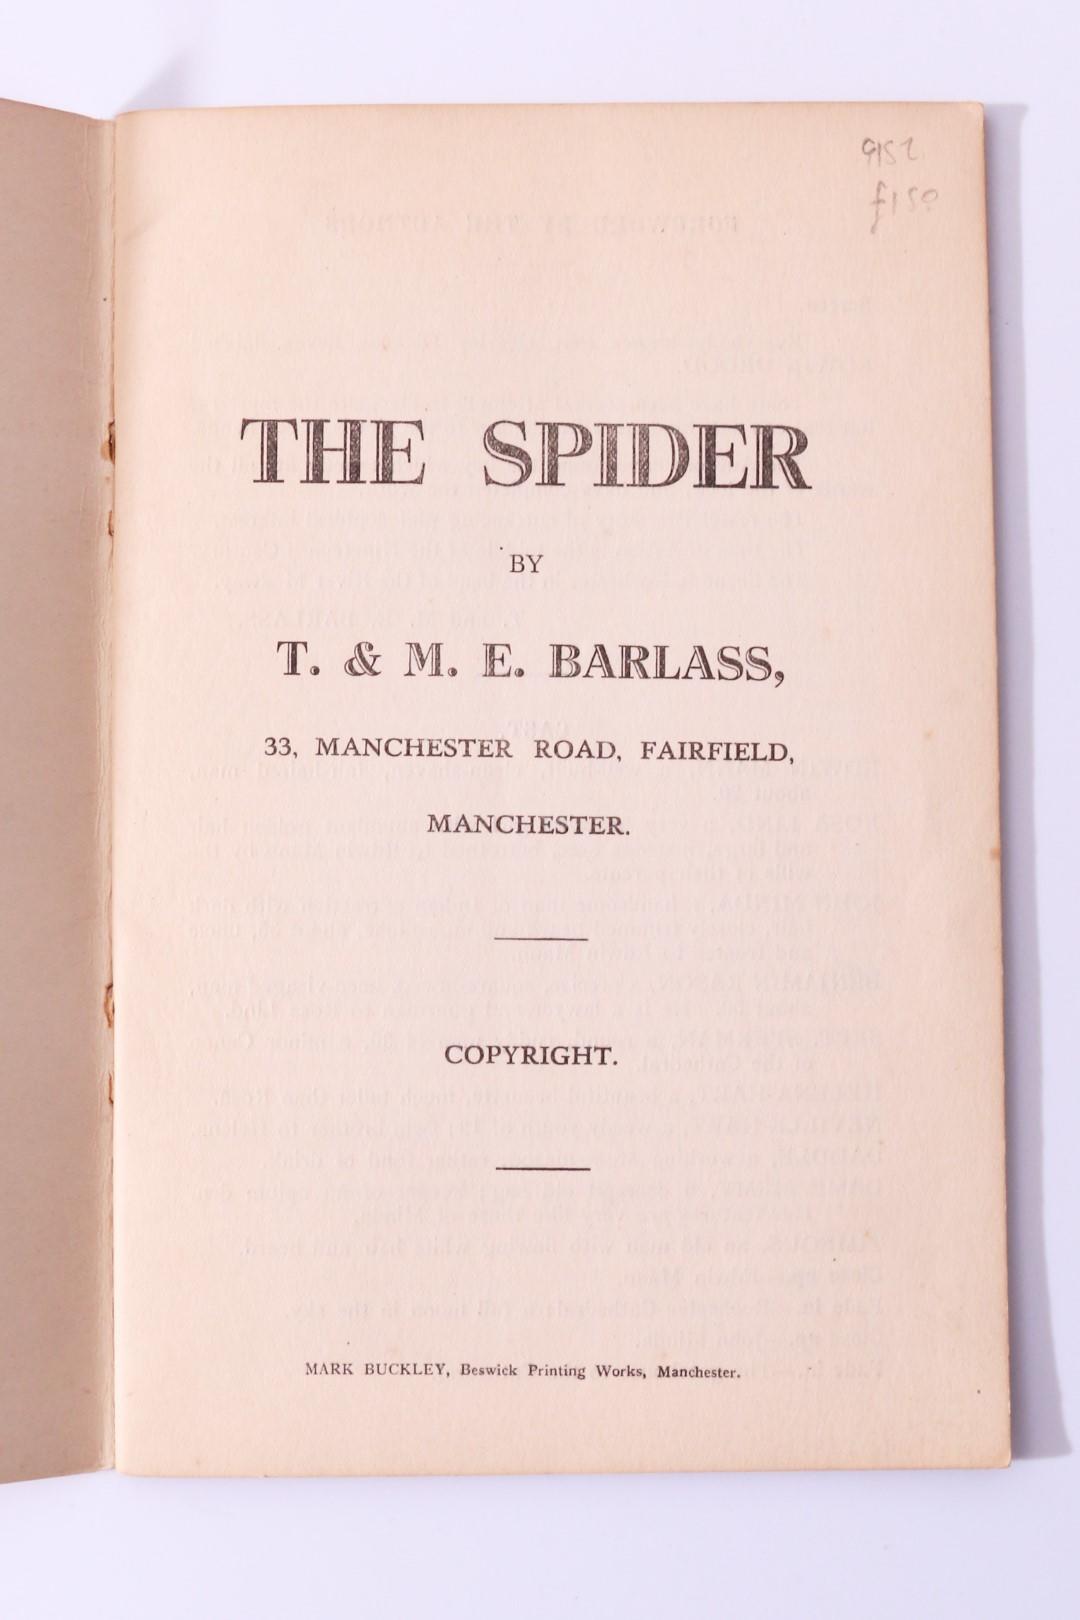 T. & M.E. Barlass - The Spider - Mark Buckley, n.d. [c1926], Signed First Edition.